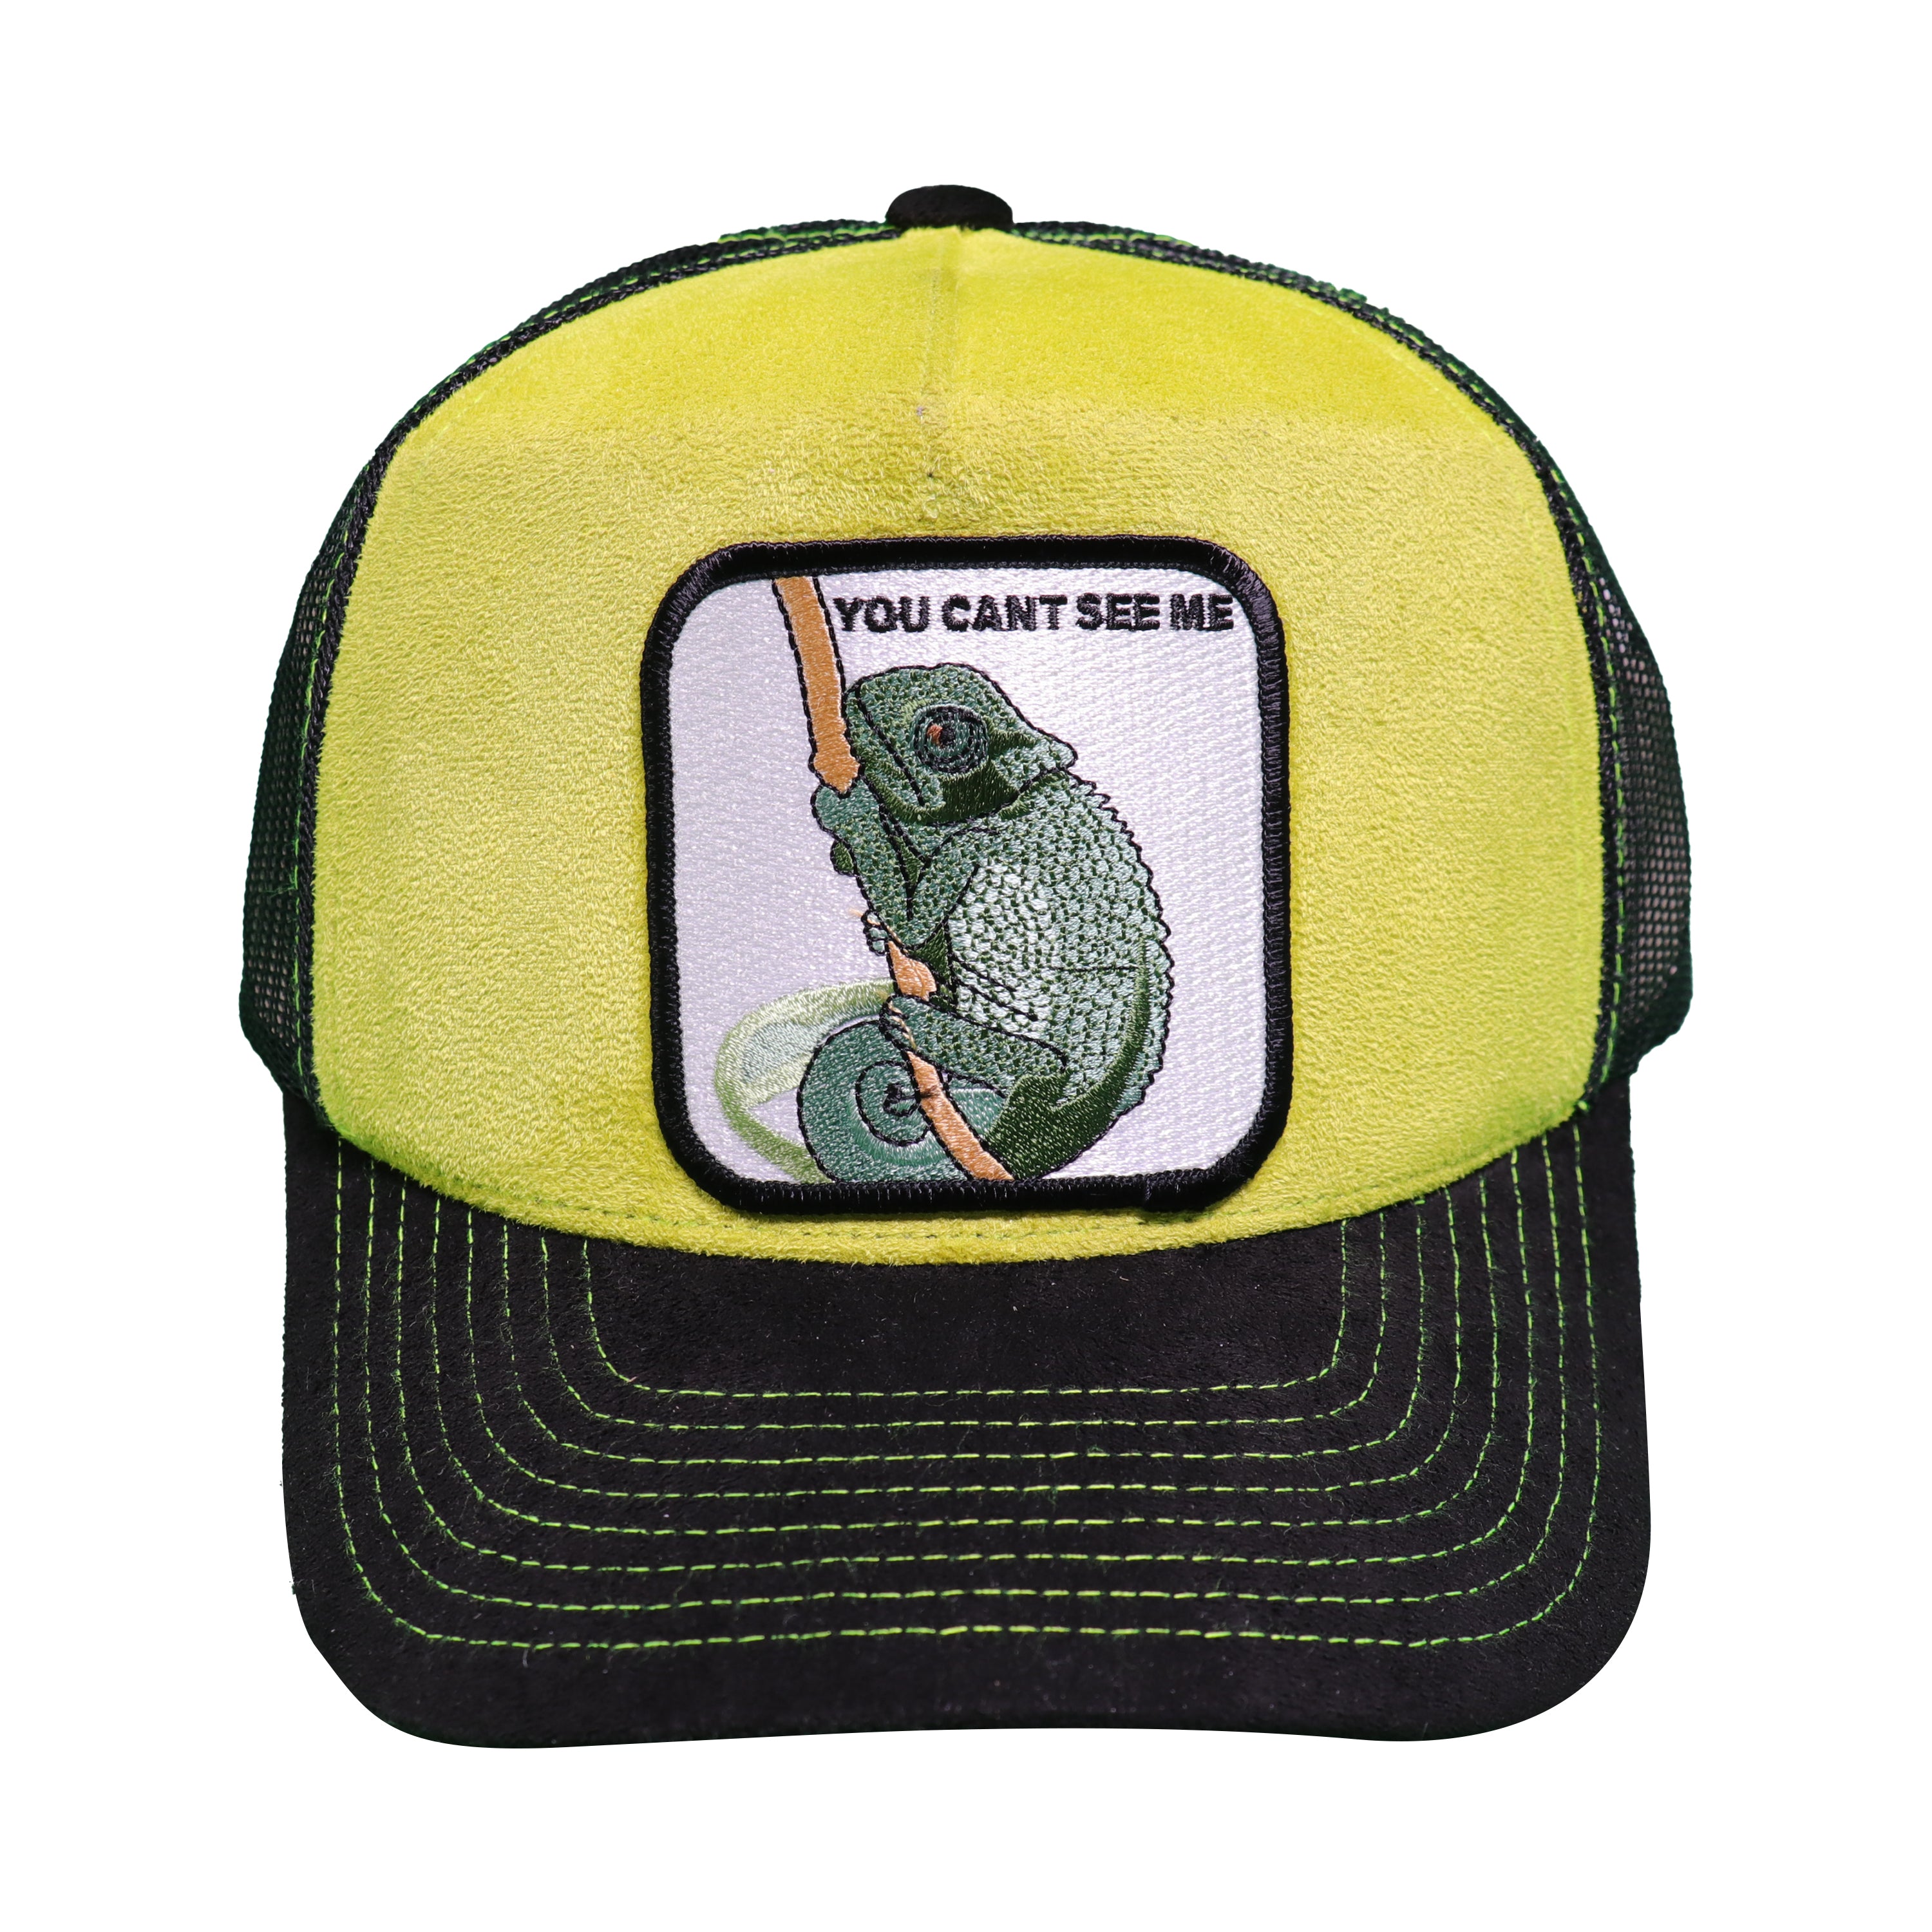 Mv you cant see me trucker hat